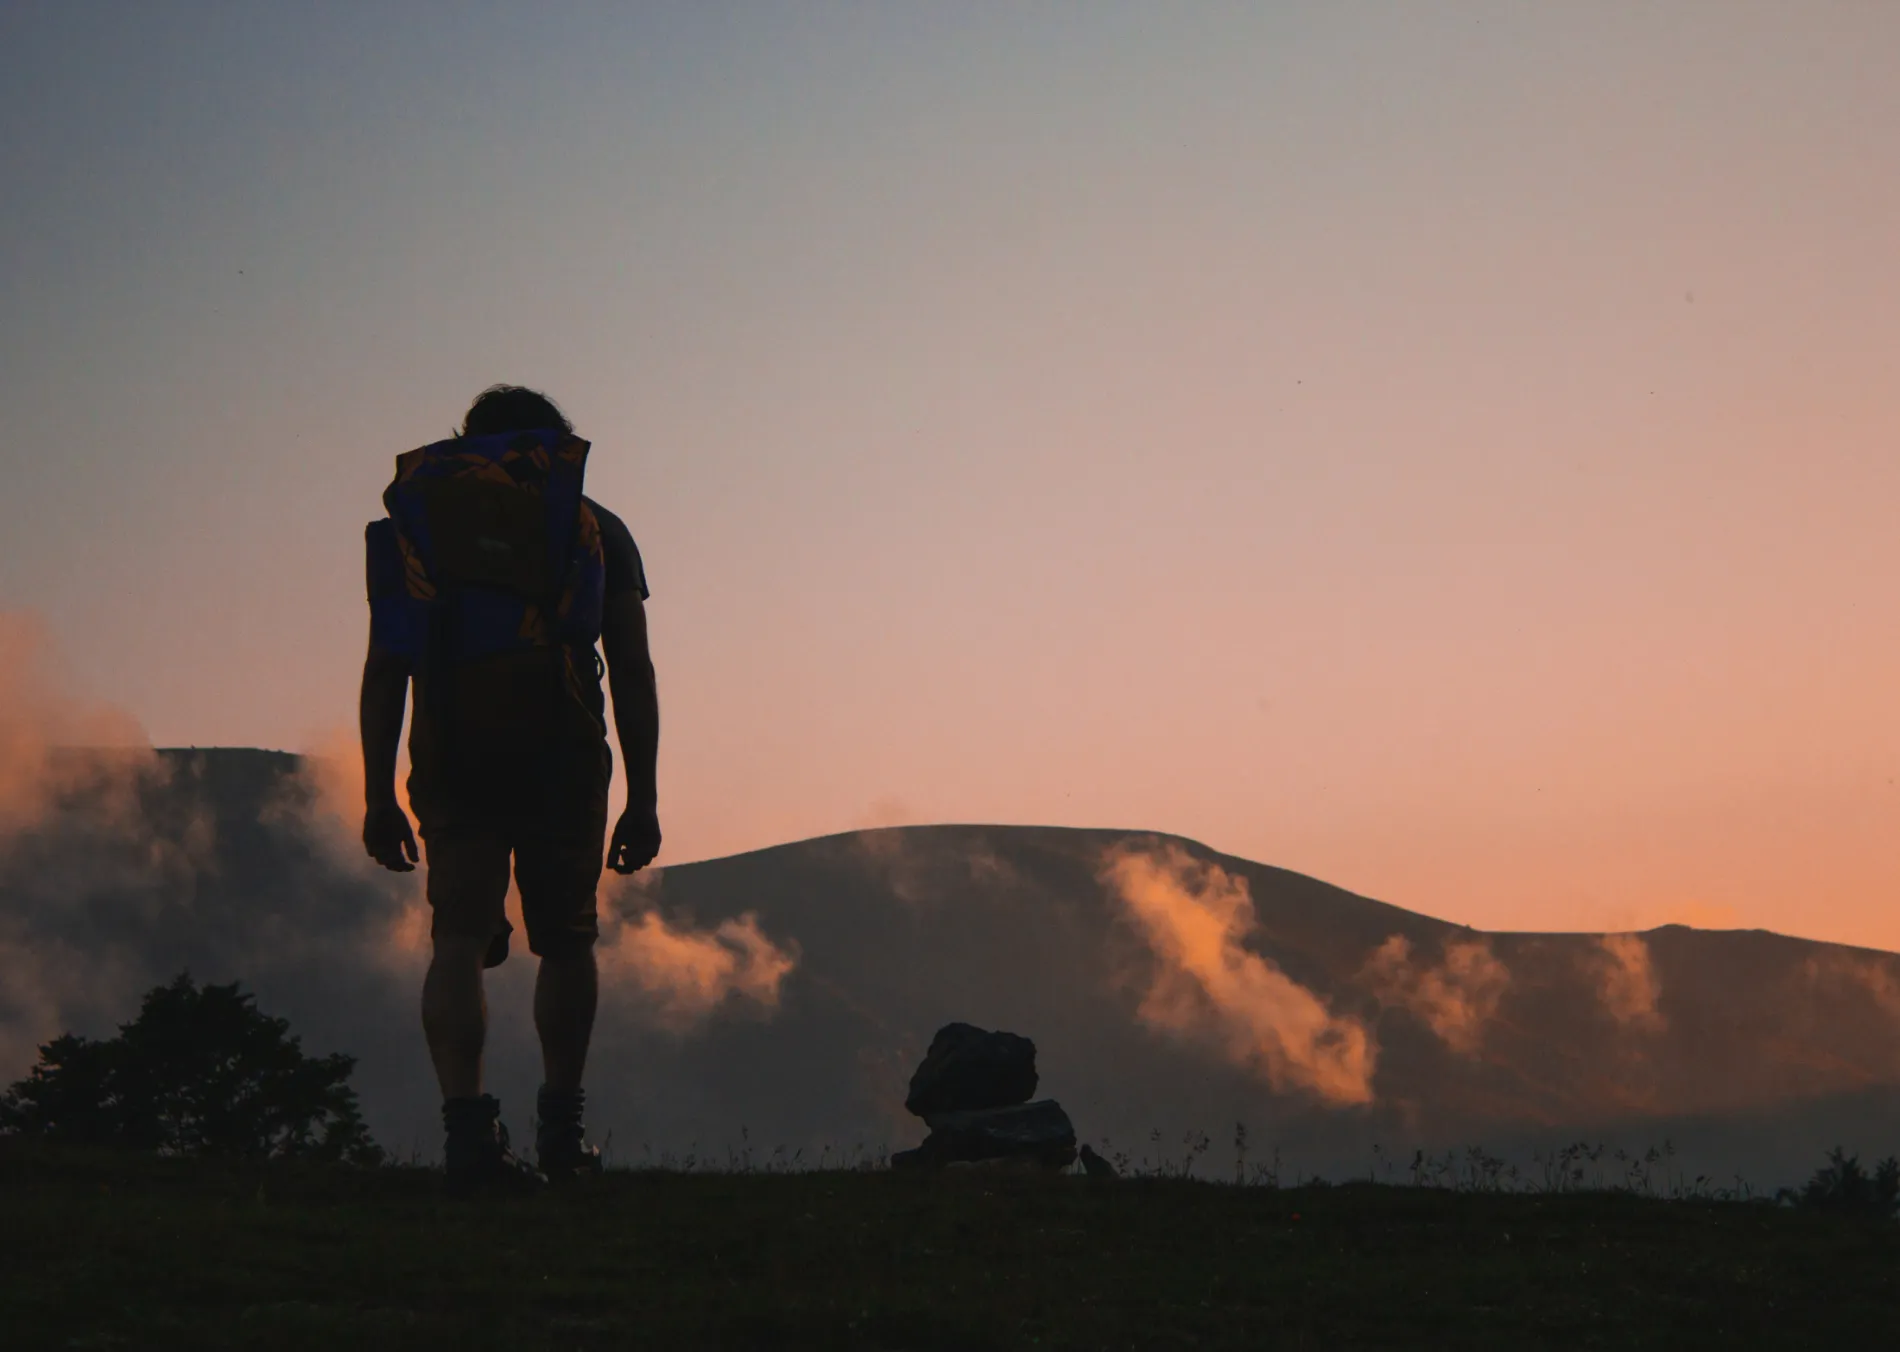 A silhouette of someone hiking with mountains in the background